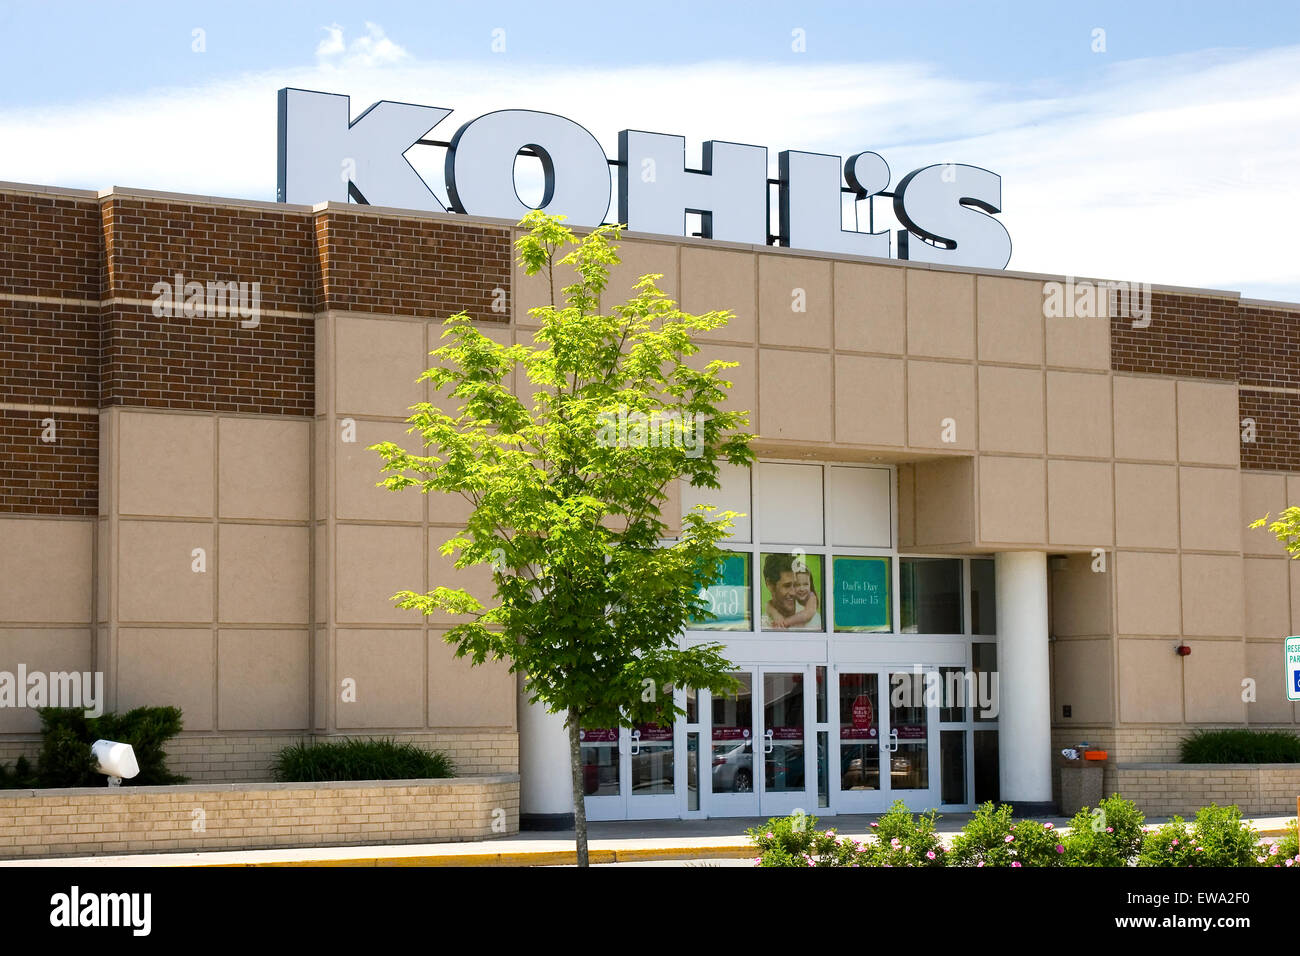 Kohl's department store presented its pop-up trailer promoting